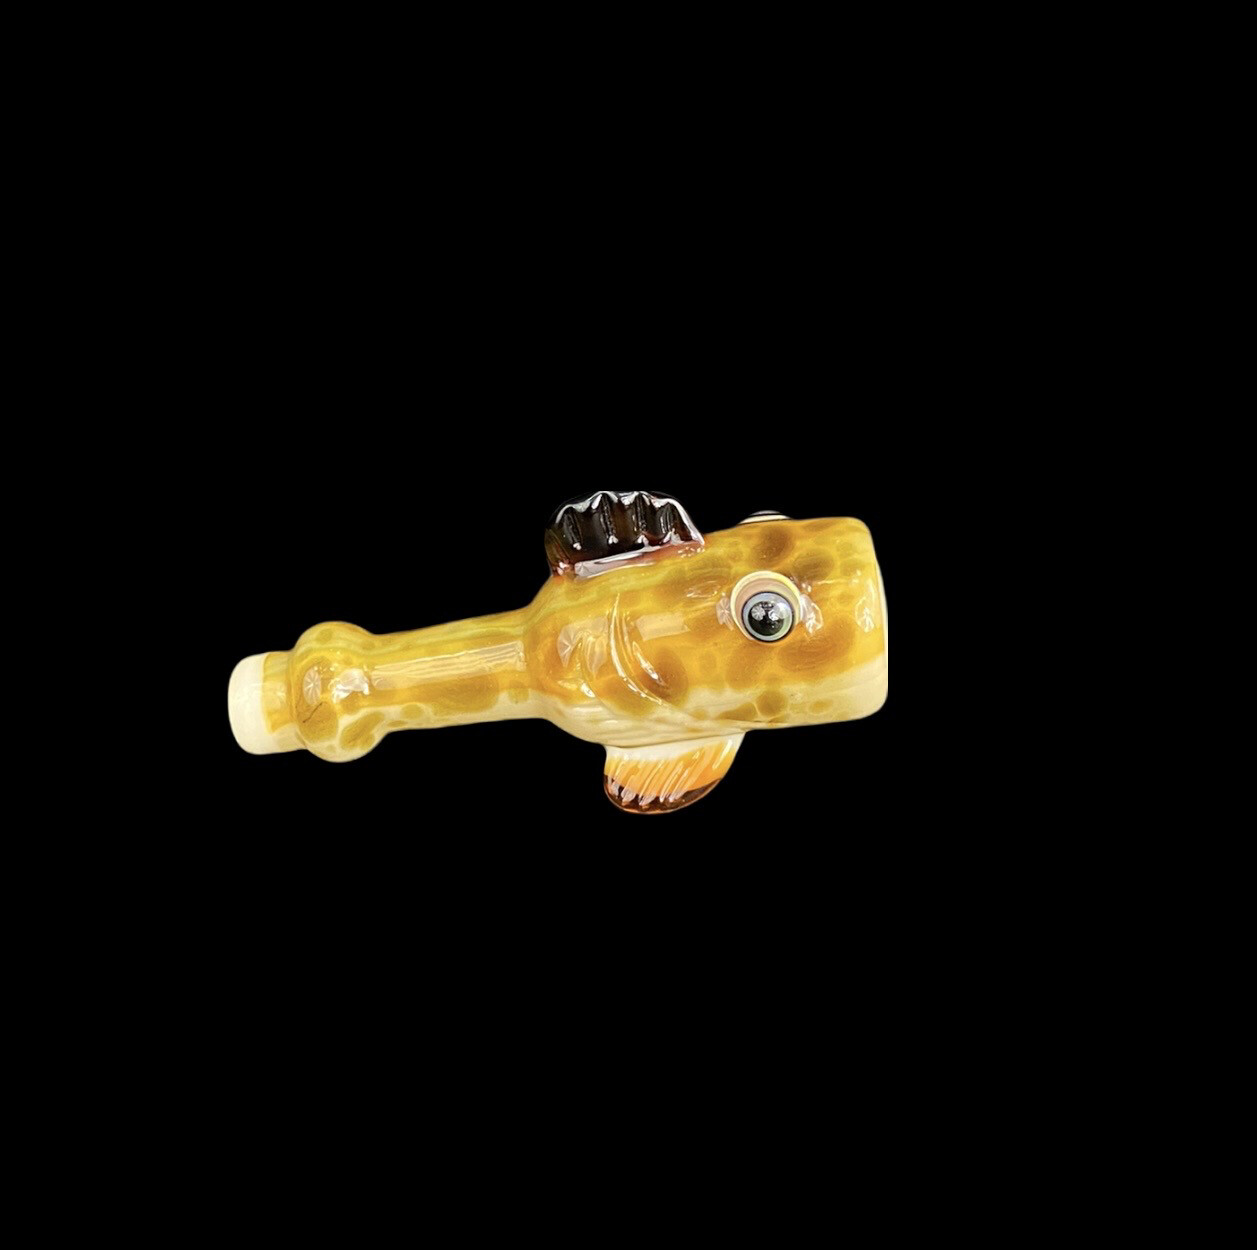 603 Glass (NH) Chillum - Goliath Grouper without Pendant Loop